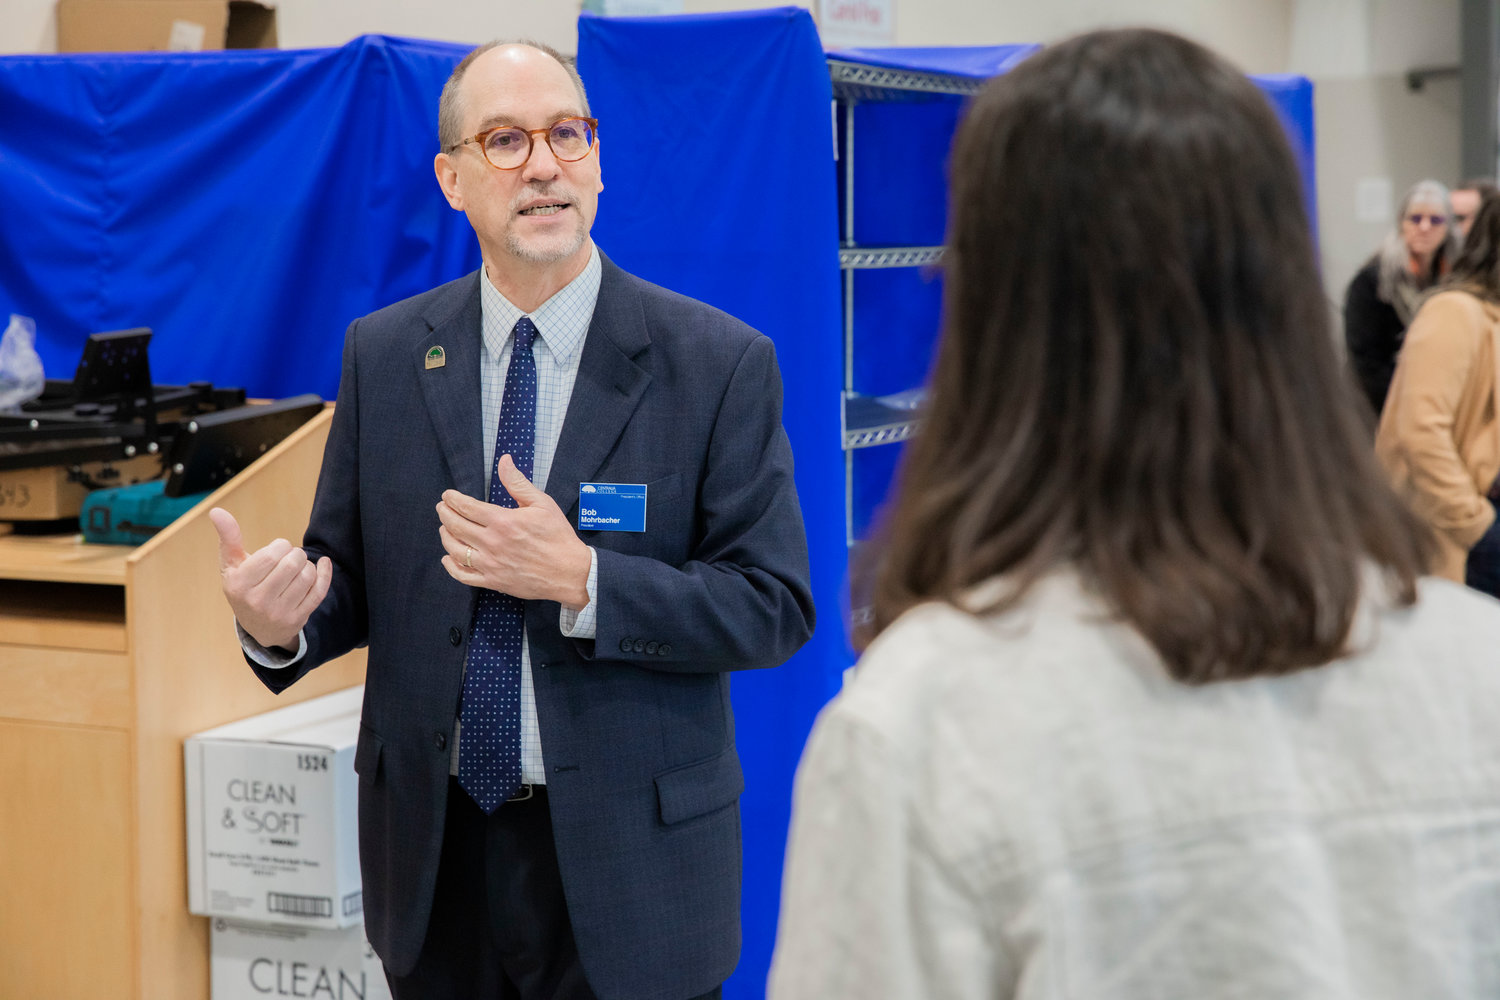 Centralia College President Bob Mohrbacher talks about bachelor programs available for students while taking Marie Gluesenkamp Perez on a tour of the campus on Friday.